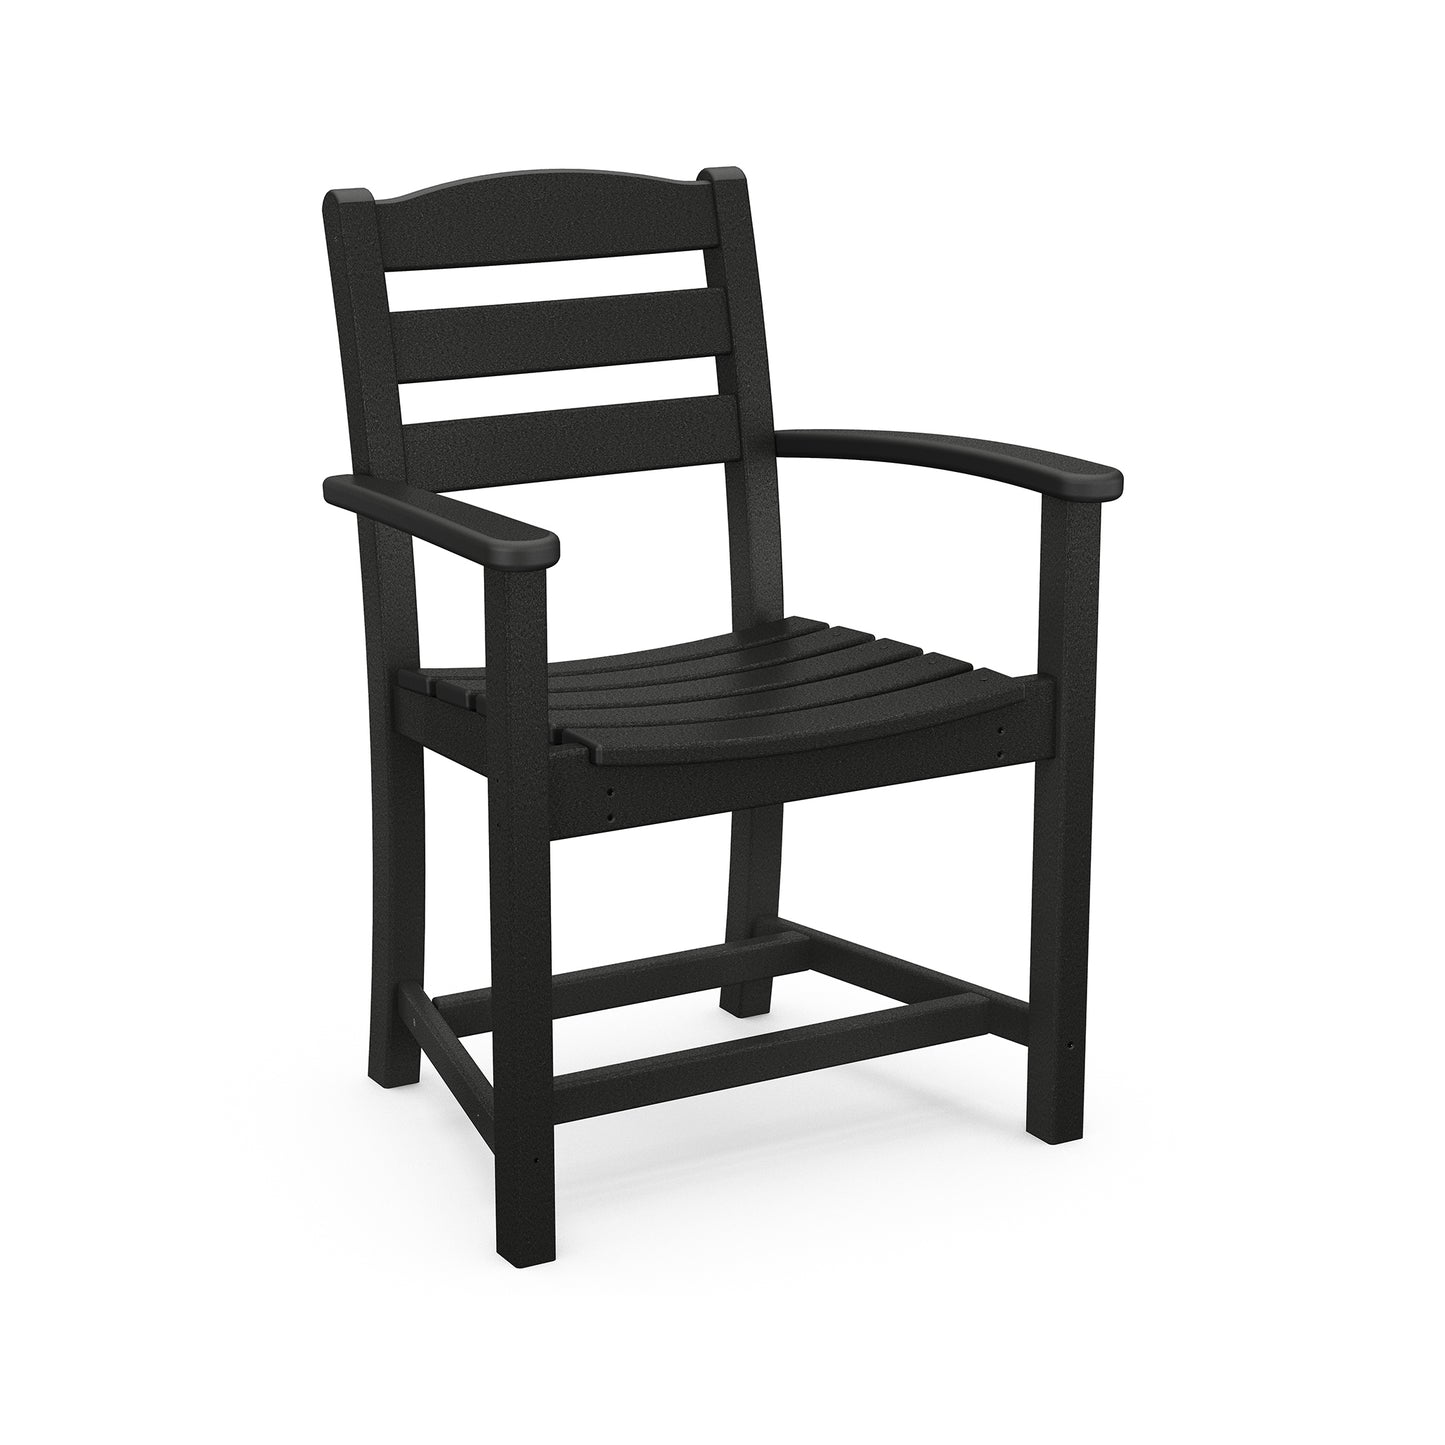 A black, traditional-style POLYWOOD La Casa Cafe Outdoor Dining Arm Chair with armrests and a slatted seat, set against a plain white background.